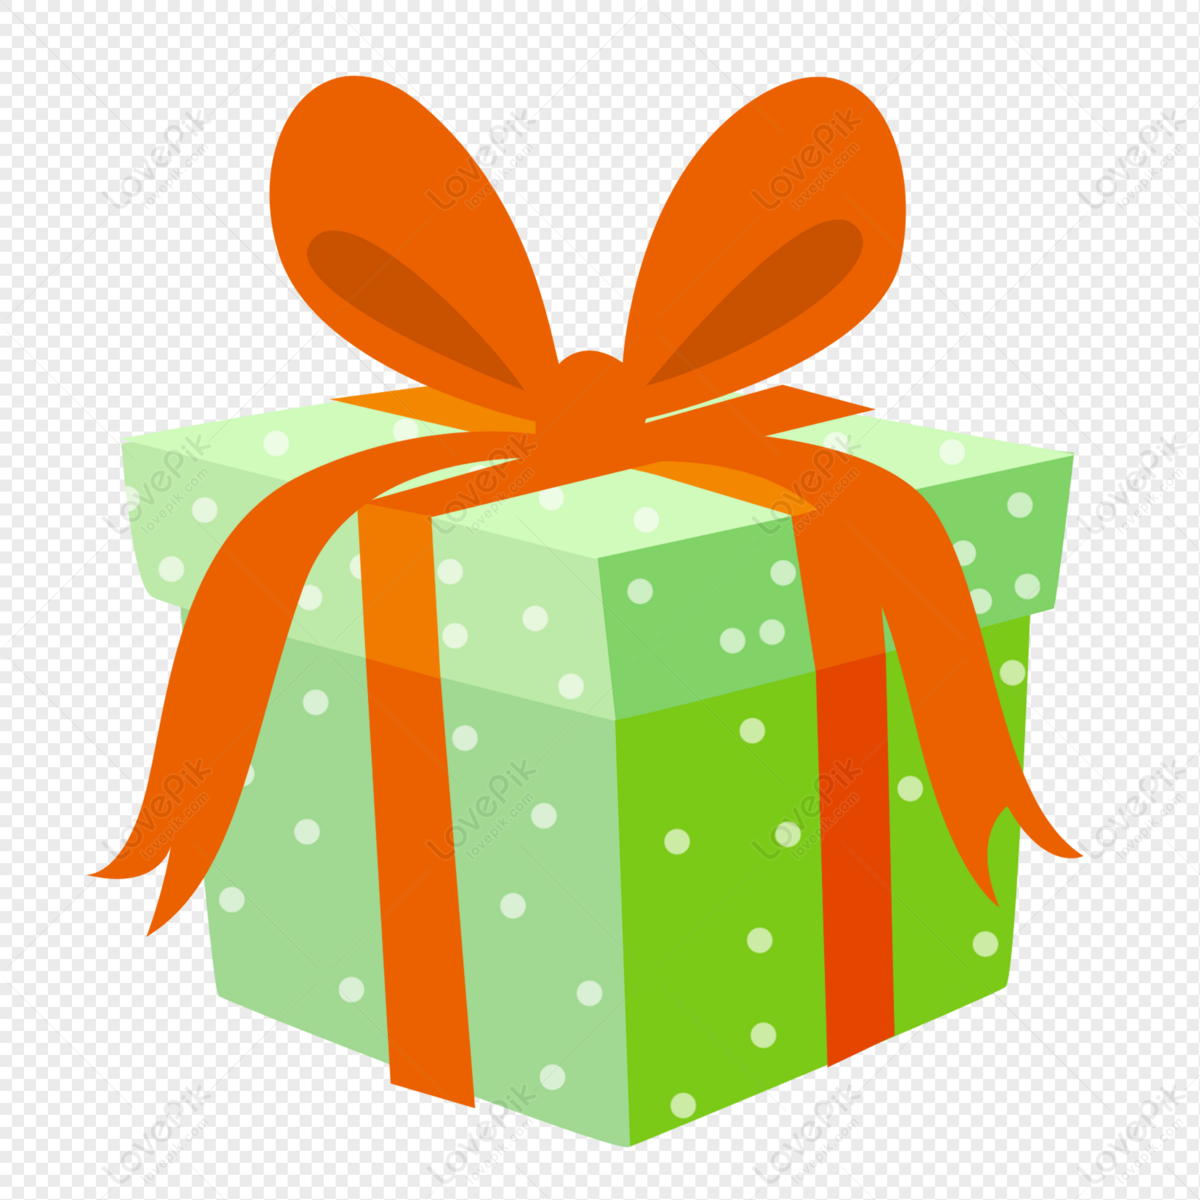 Surprising Christmas Gift Box Cartoon PNG Free Download And Clipart Image  For Free Download - Lovepik | 401424993